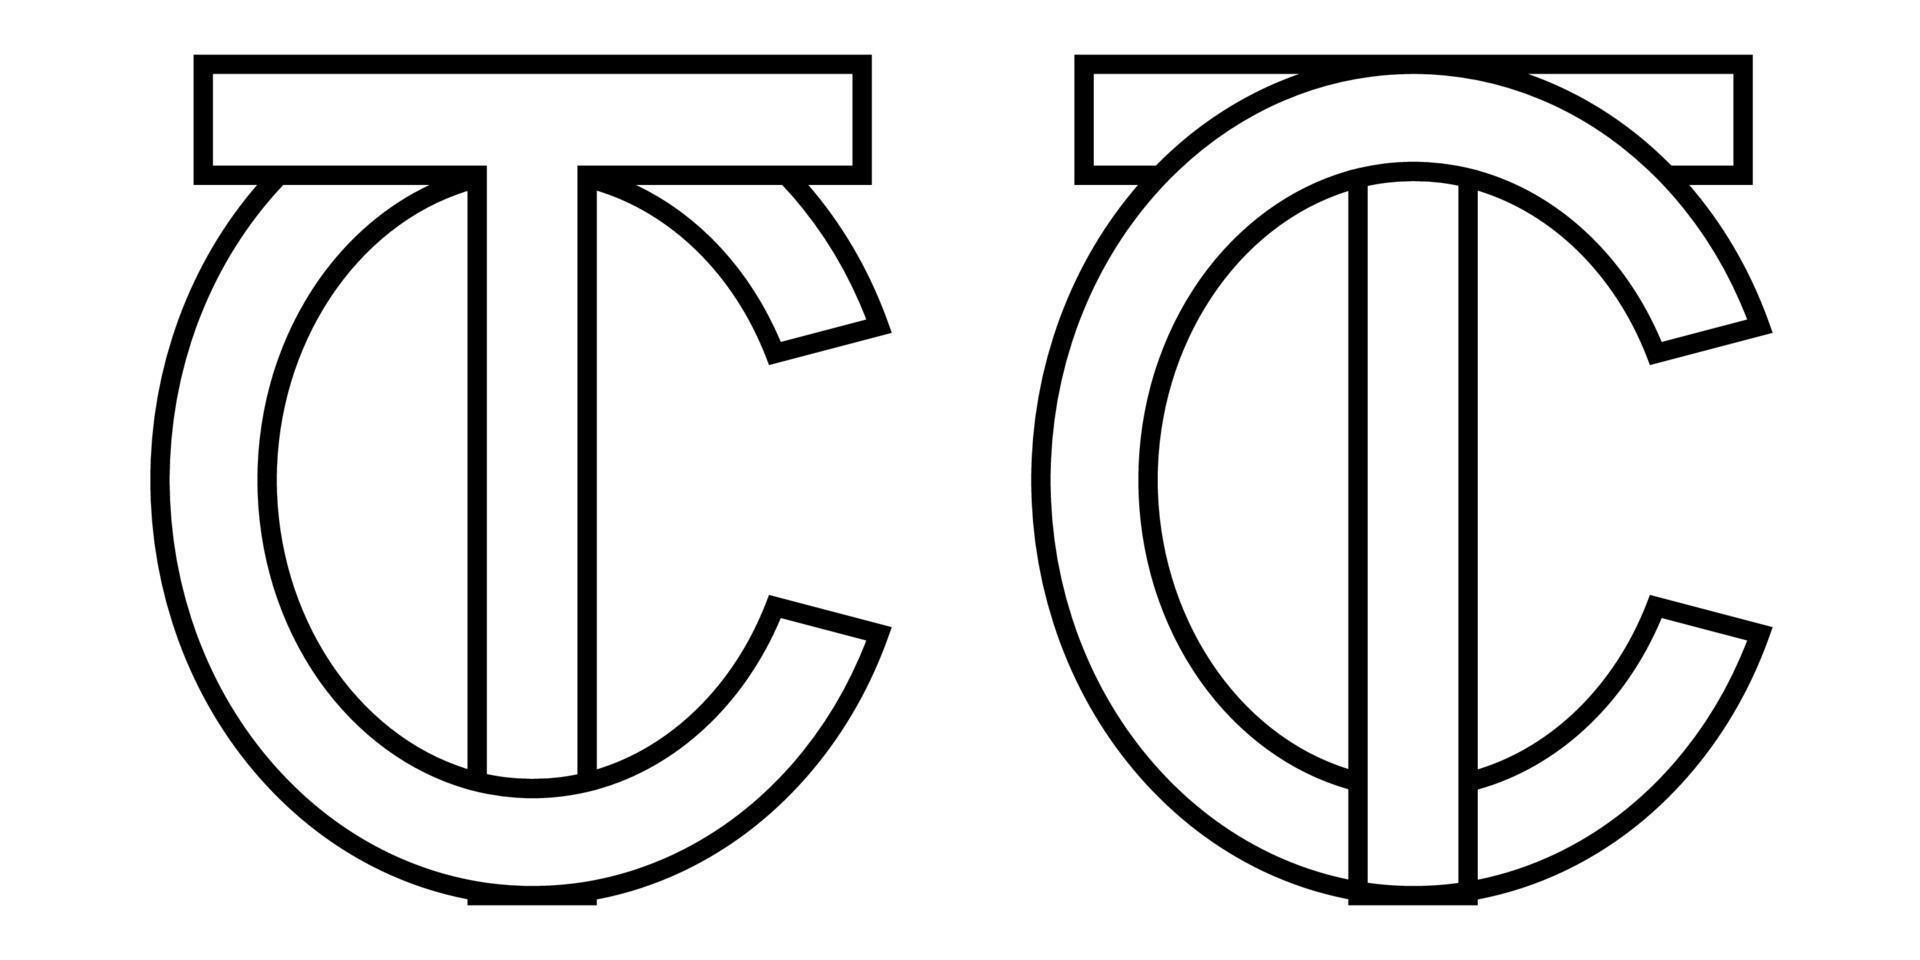 Logo sign tc ct icon sign two interlaced letters T, C vector logo tc, ct first capital letters pattern alphabet t, c